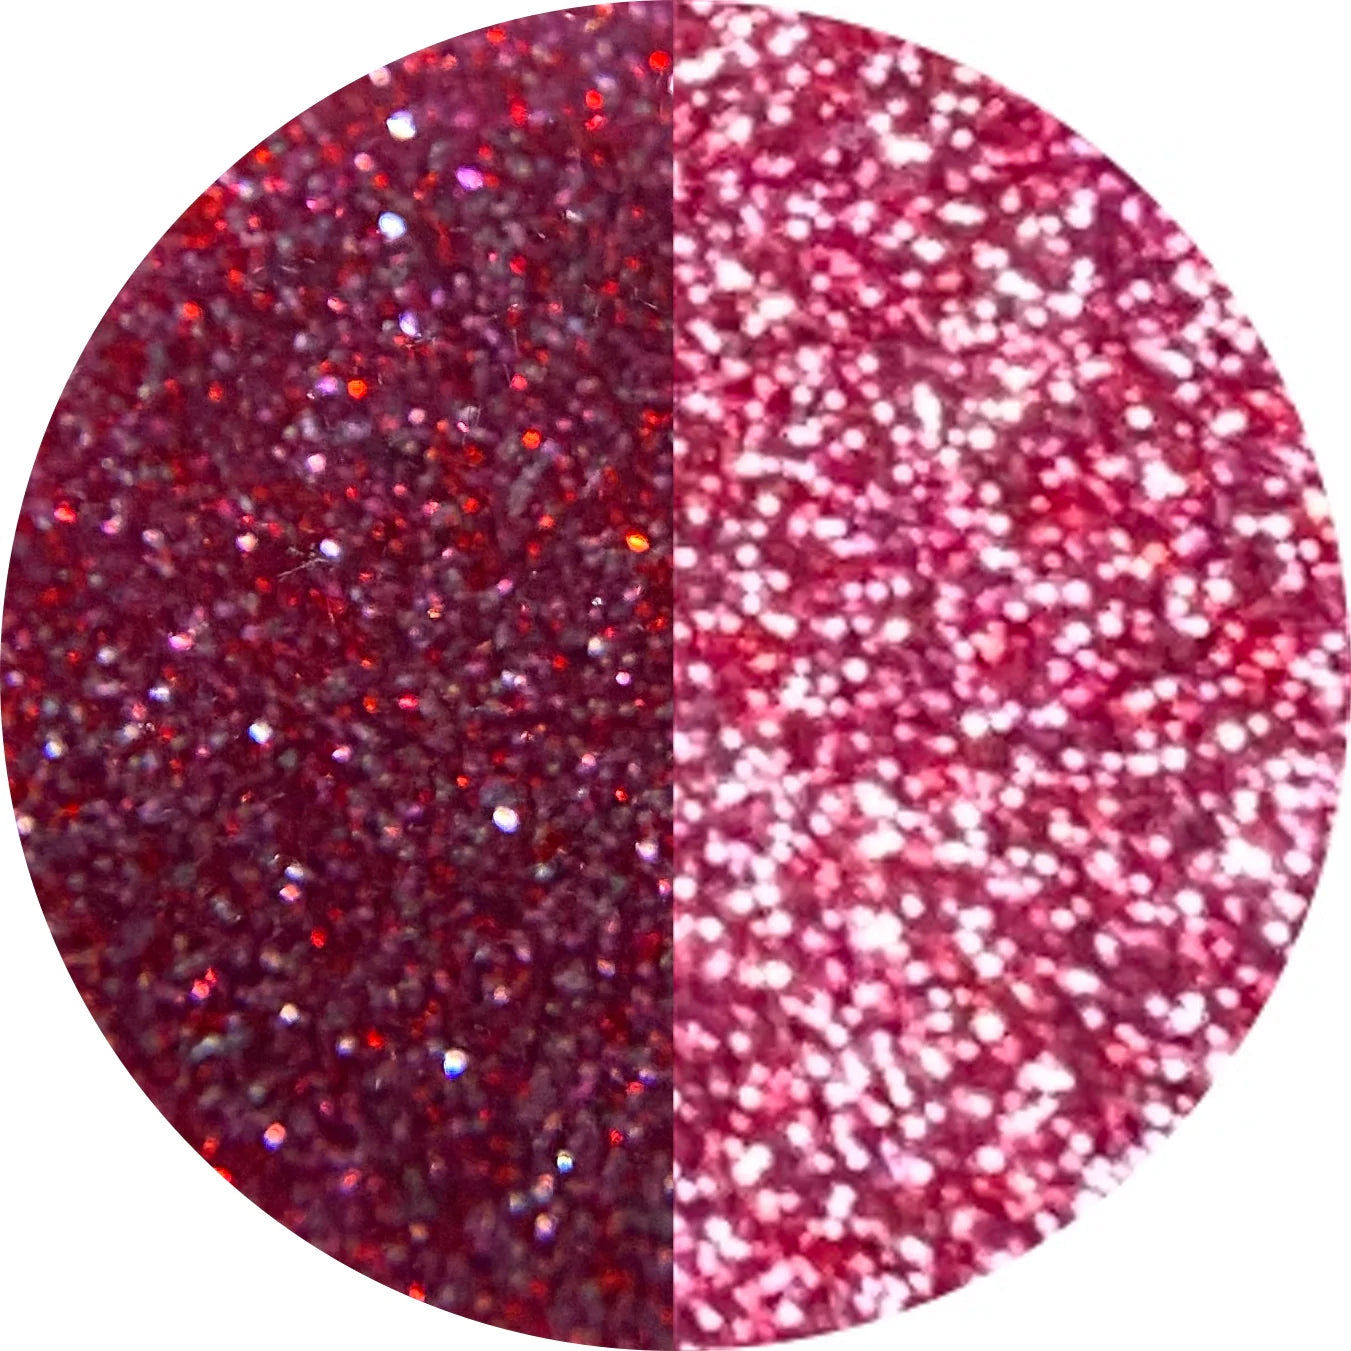 Wildflowers Flare Reflective Gel Polish - Ritzy Ruby - Creata Beauty - Professional Beauty Products